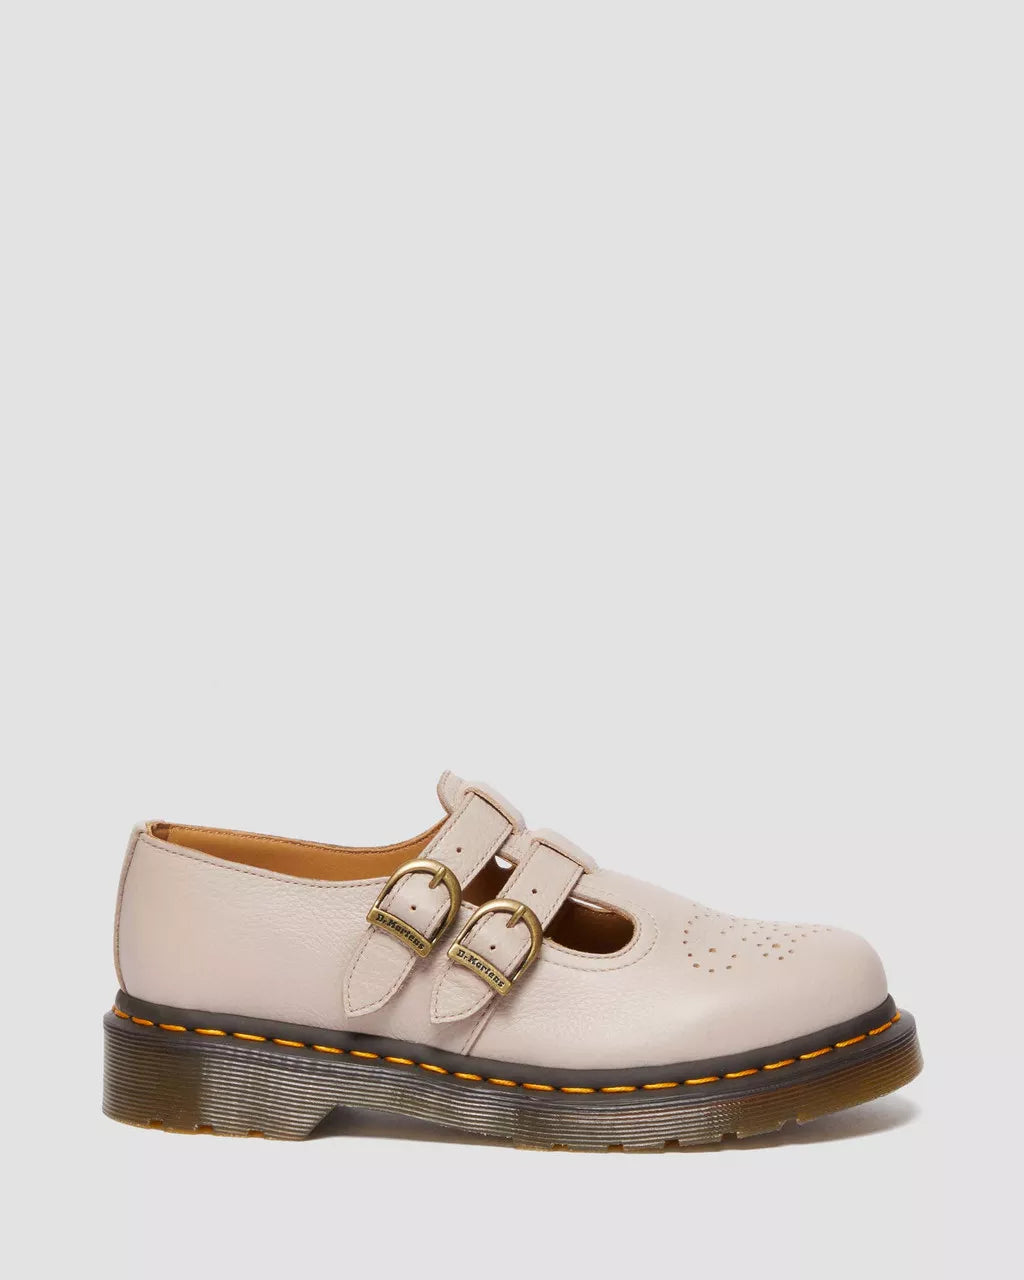 Dr. Martens | 8065 Virginia Leather Mary Jane | Vintage Taupe - Poppy and Stella